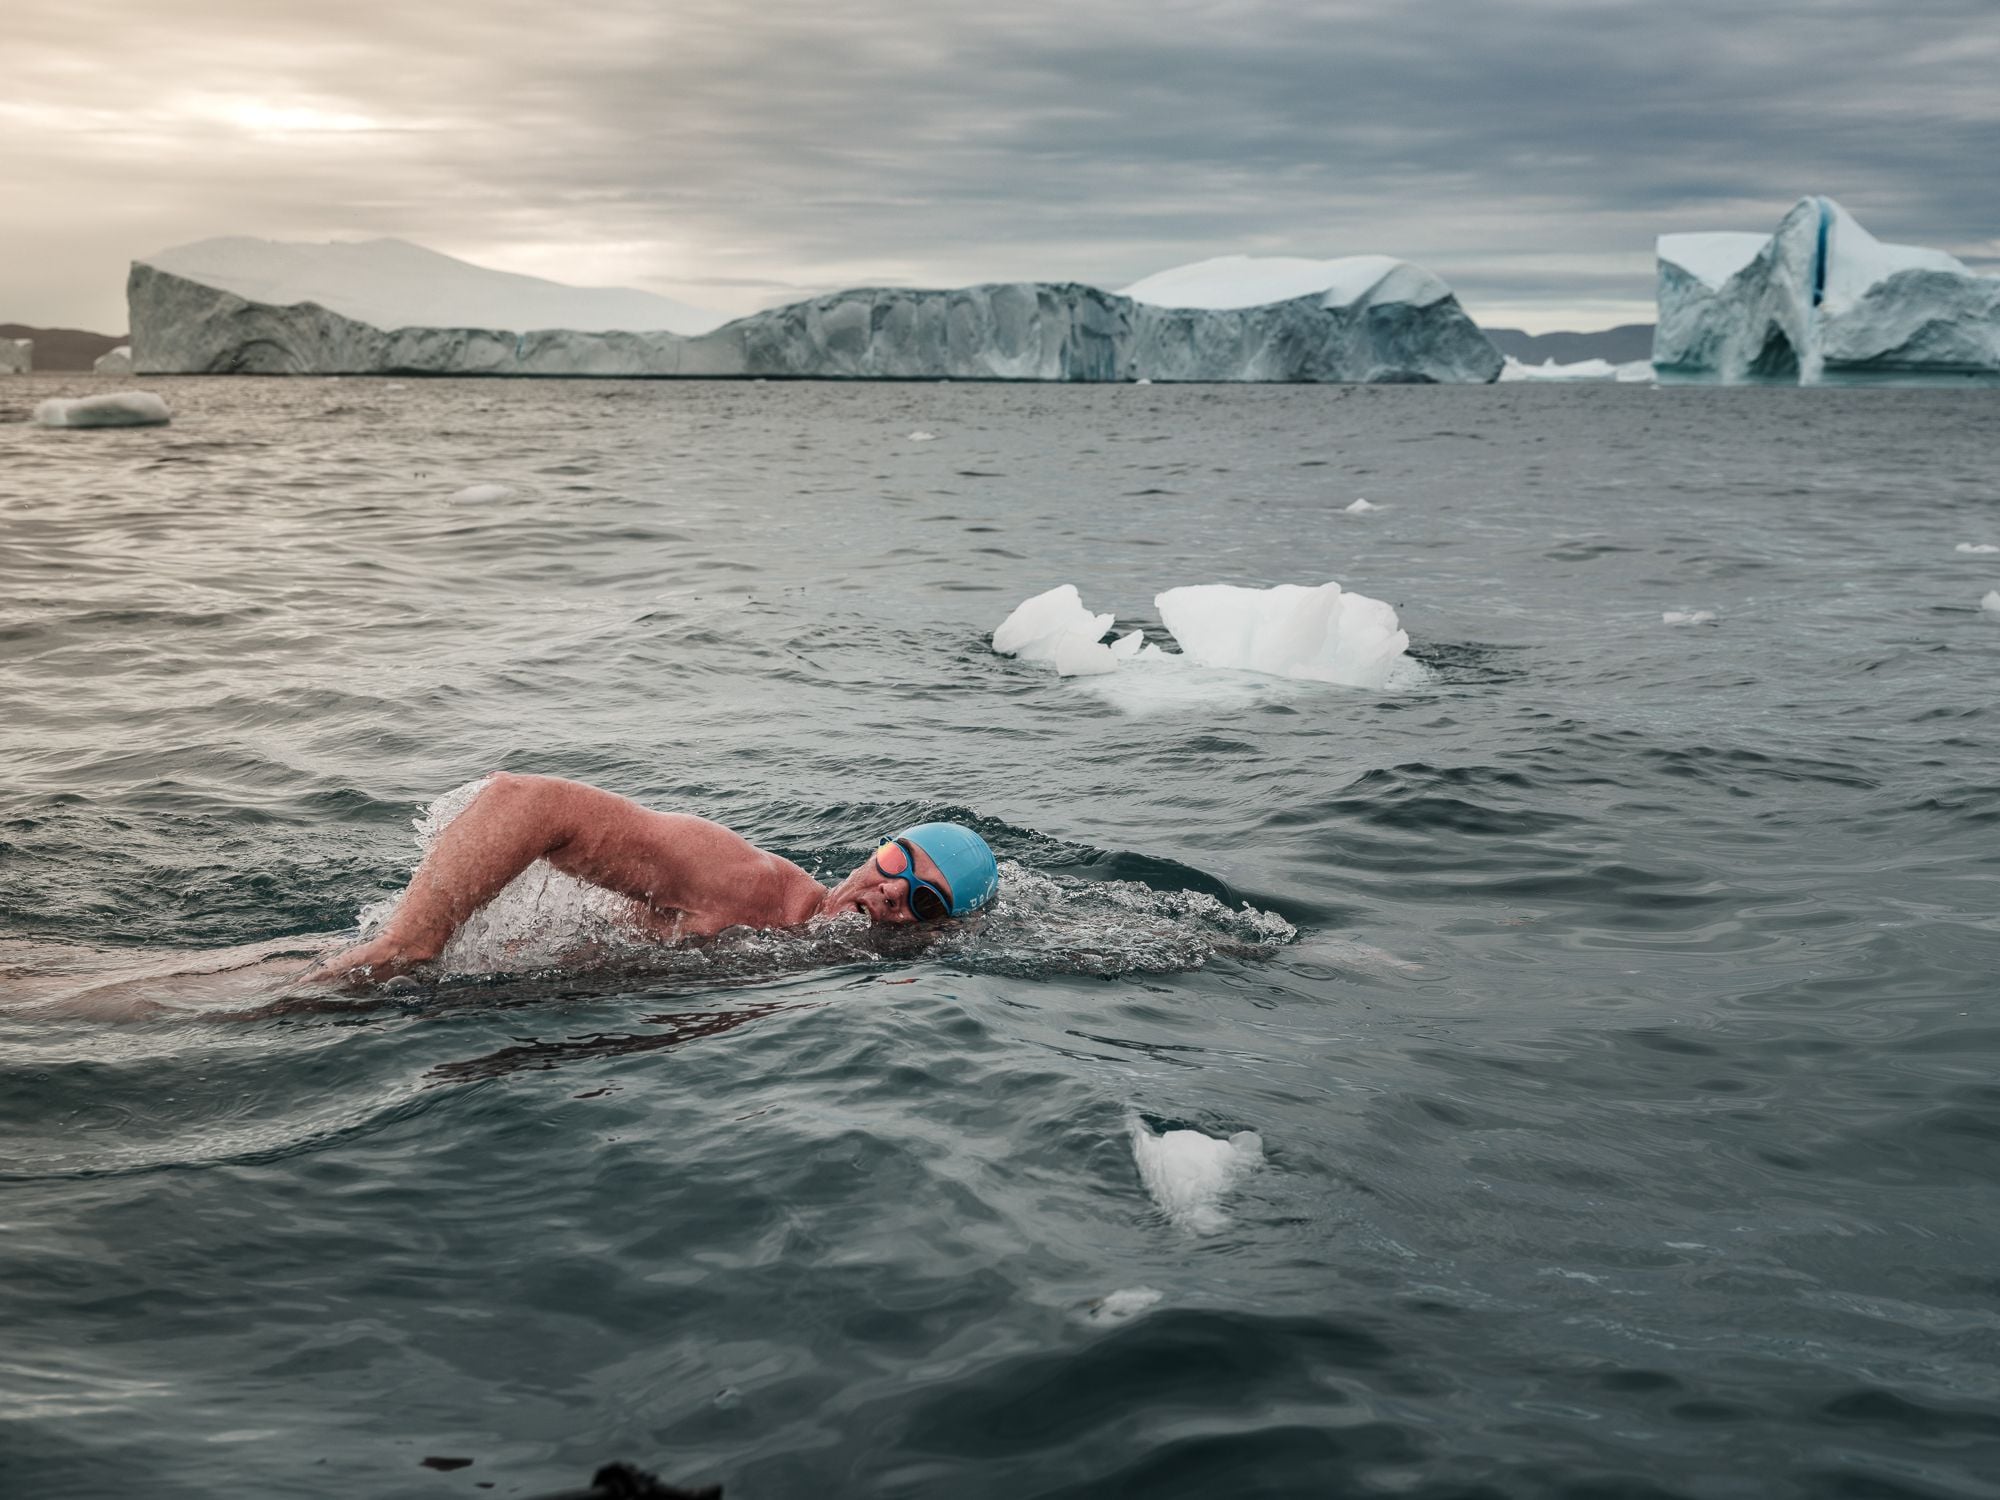 The mouth of the Icefjord is 7.8 km wide. The route will not be straightforward – Lewis will have to contend with icebergs and brash ice (an accumulation of floating ice made up of fragments). The water will be near freezing, and the wind chill could plummet temperatures deep into negative numbers. The cumulative effects of swimming, day after day, in water that may drop to minus 1.7°C, have never been tested.